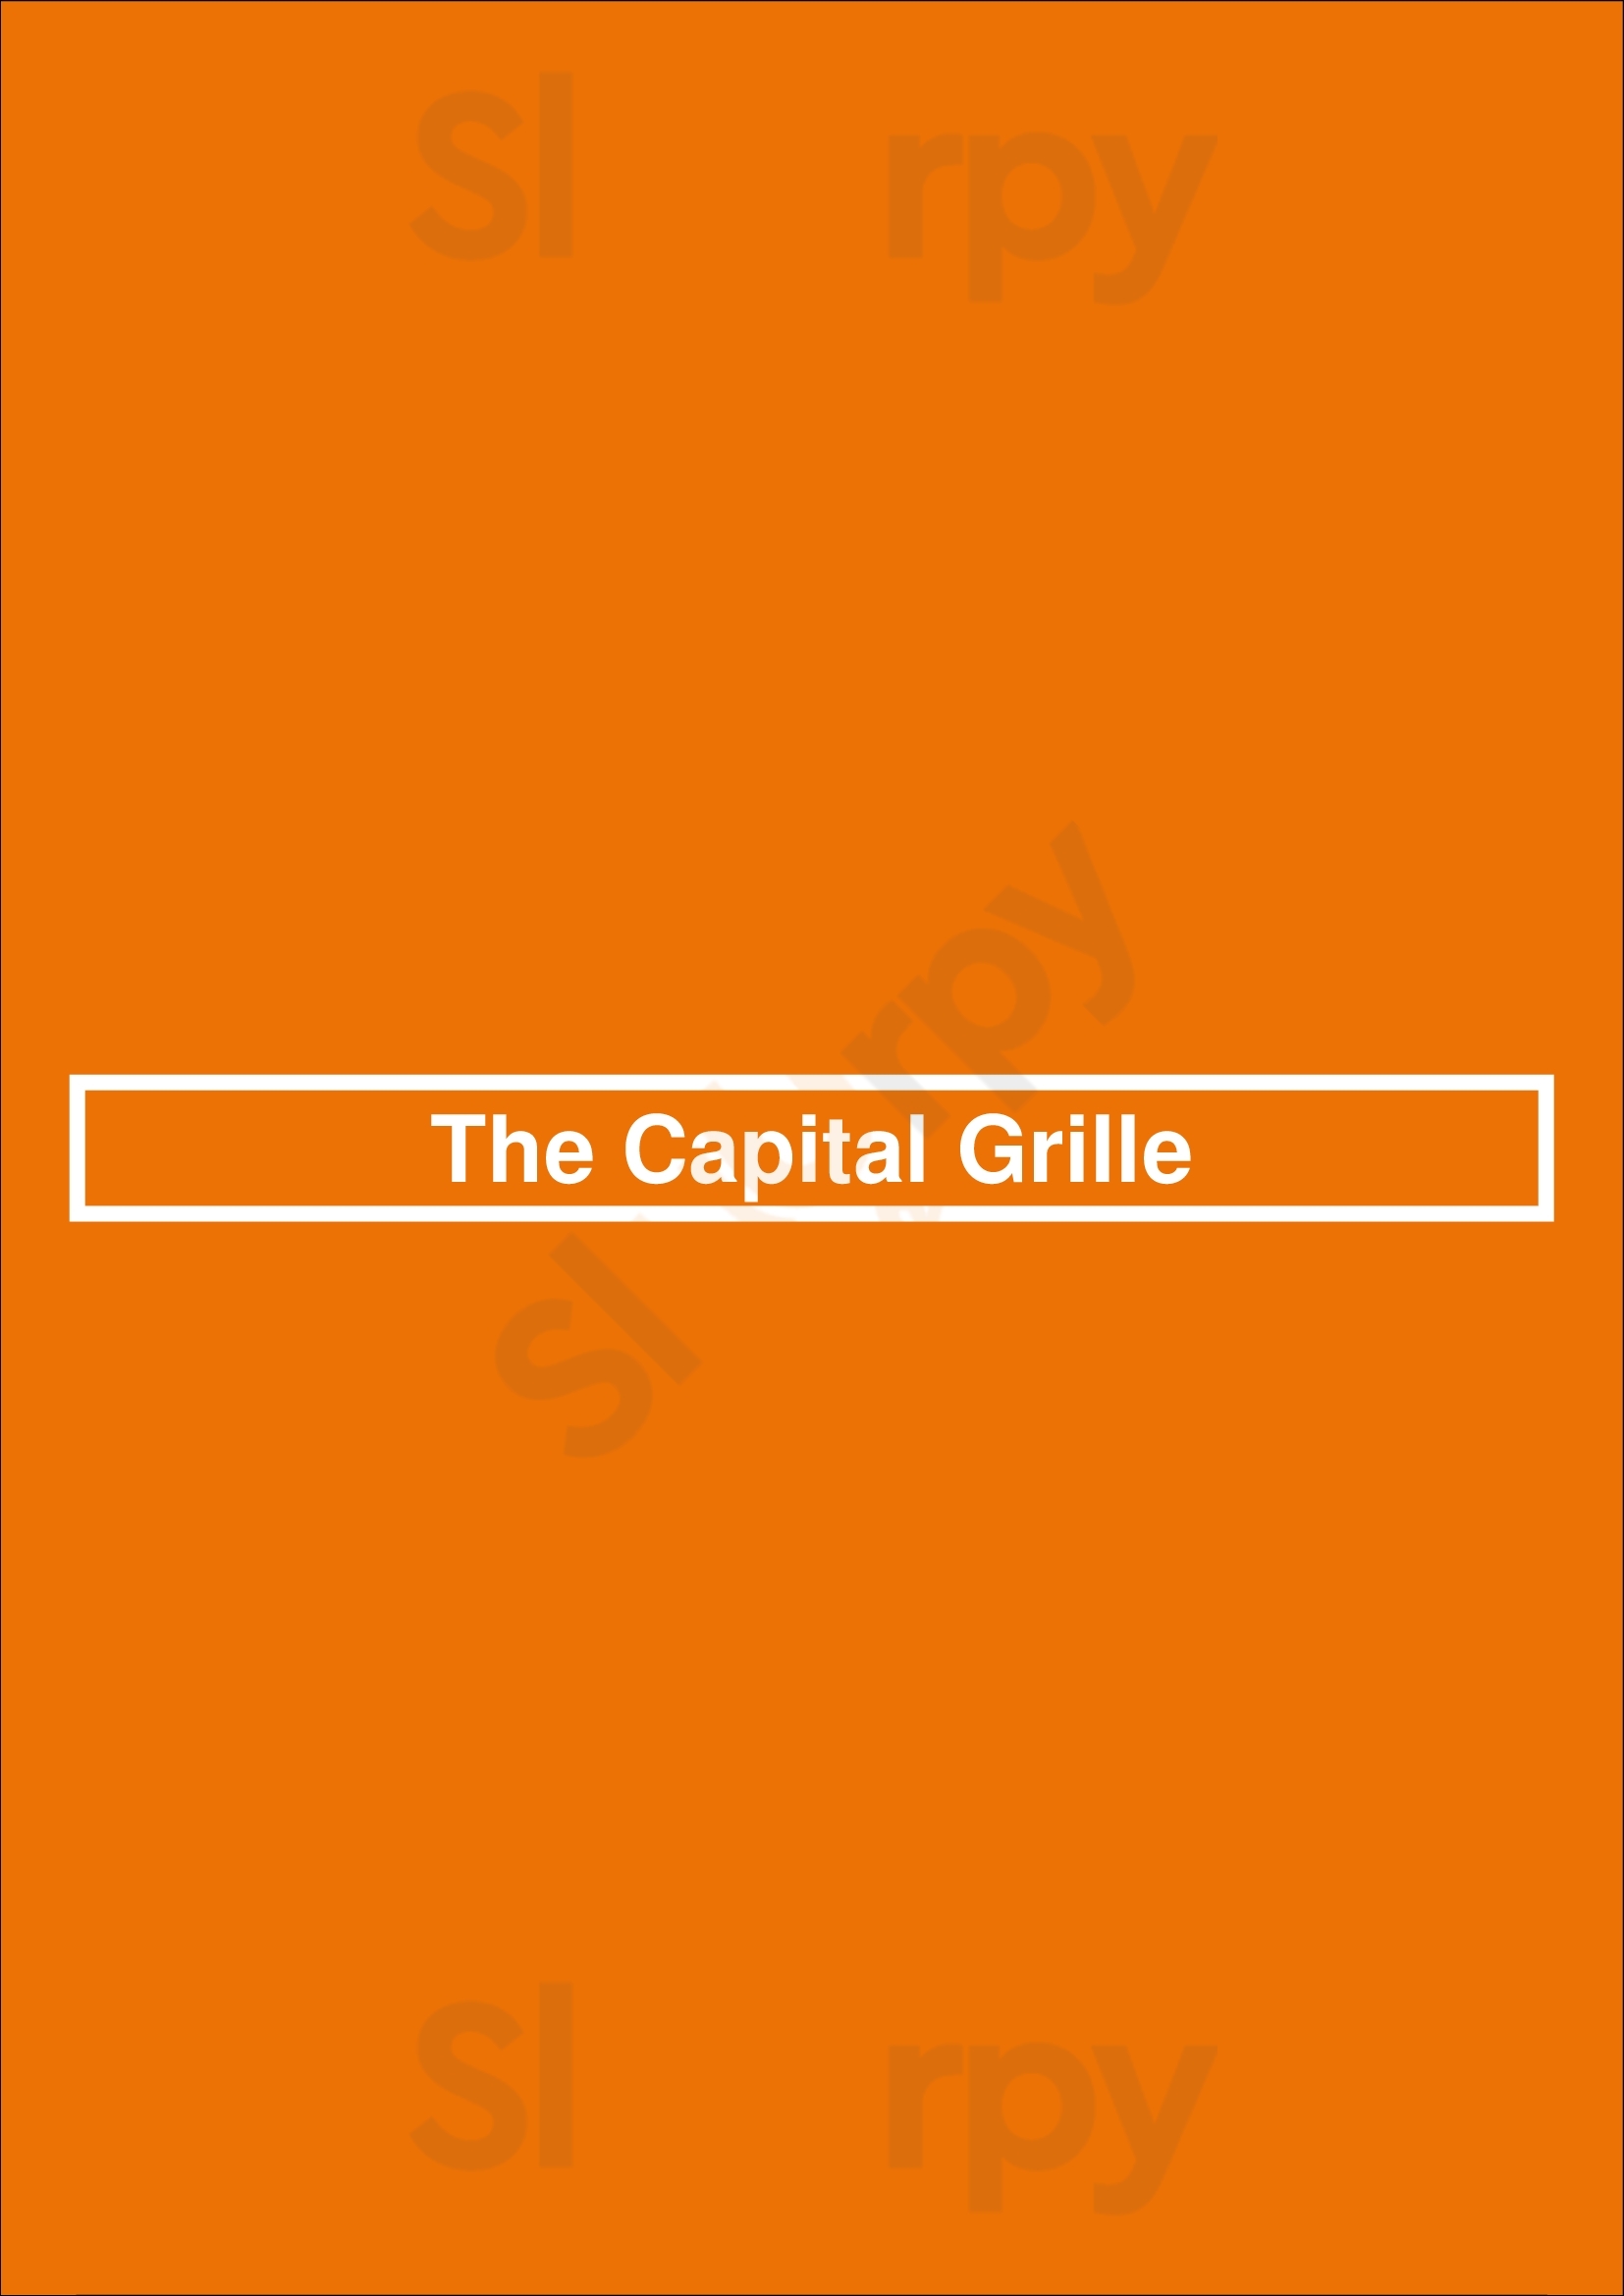 The Capital Grille Chicago Menu - 1